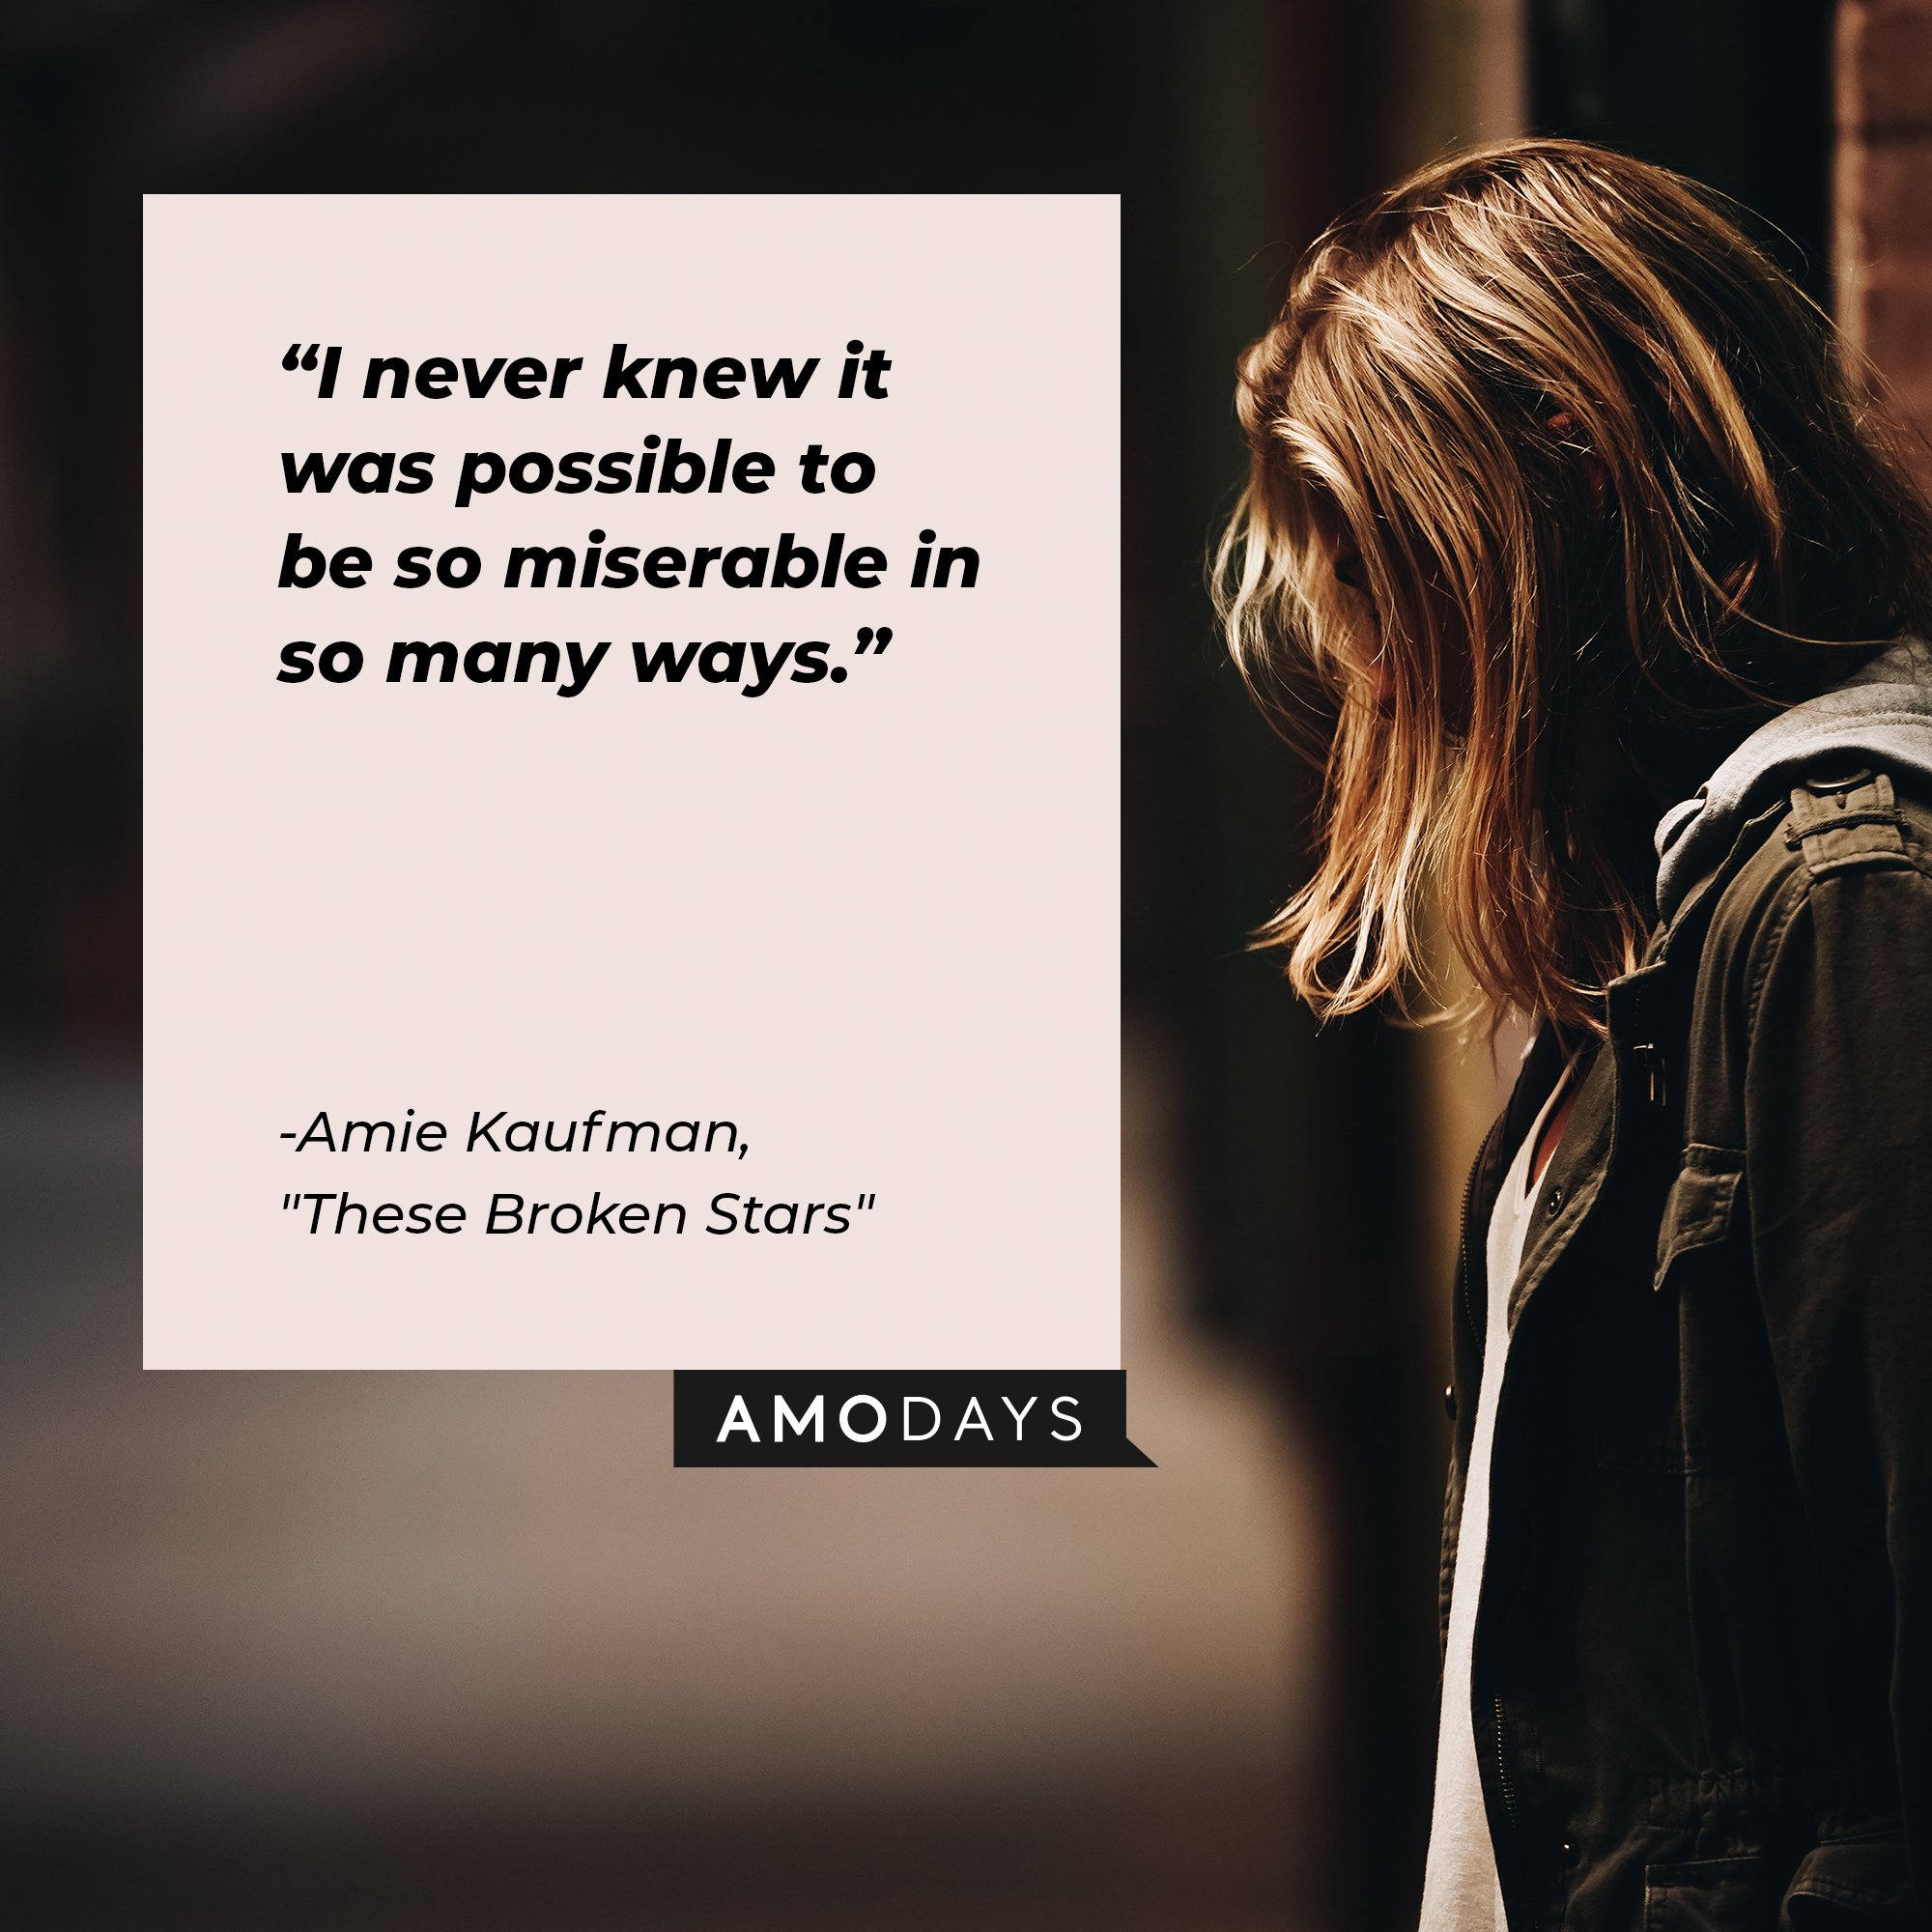 Amie Kaufman’s quote from "These Broken Stars": "I never knew it was possible to be so miserable in so many ways." | Image: AmoDays